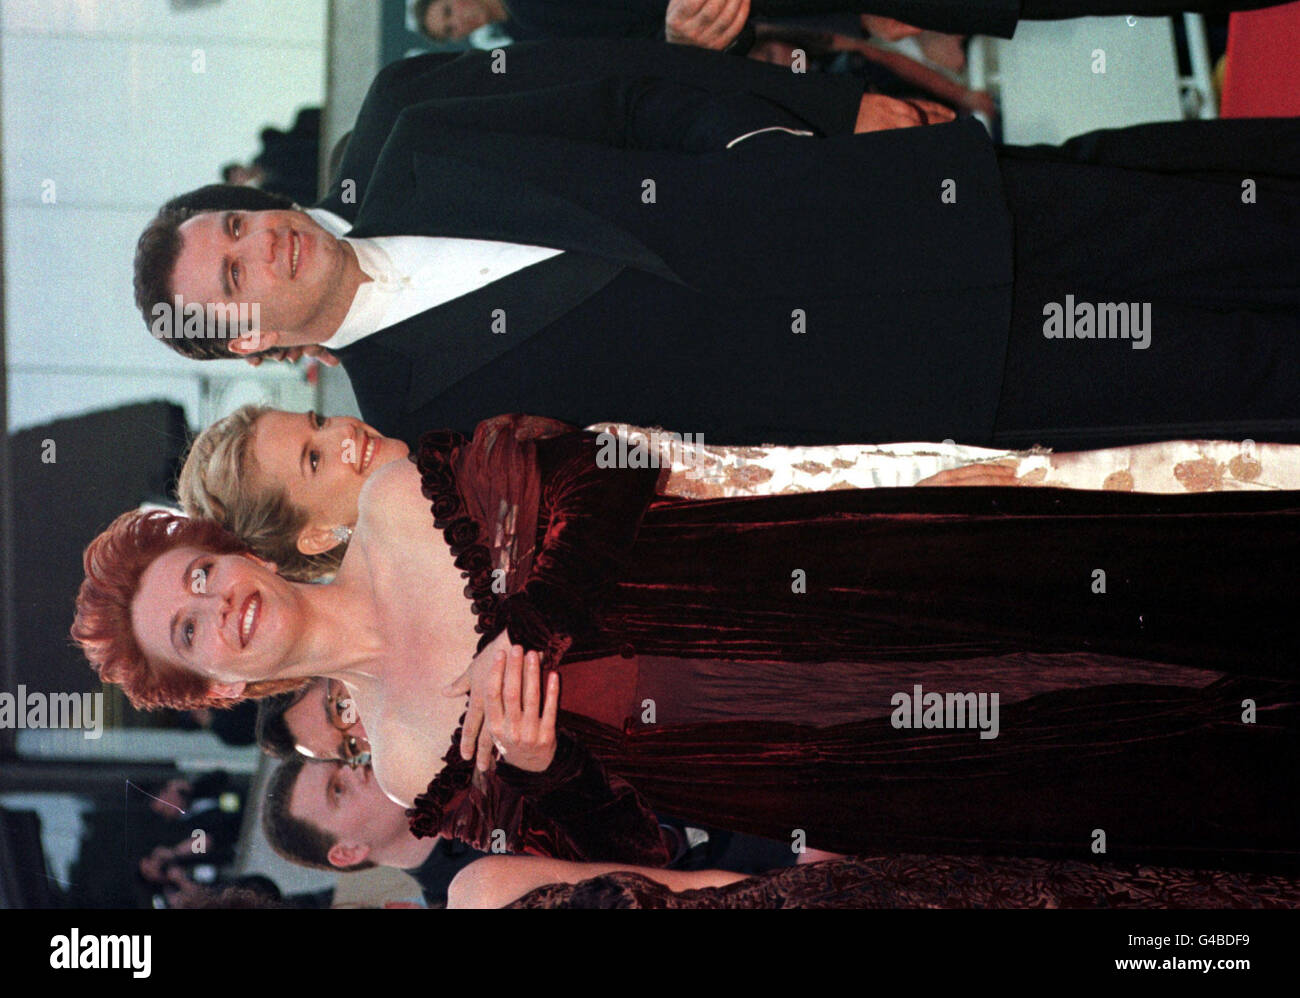 Emma Thompson with John Travolta and his wife Kelly Preston (C) arrive at the Palais Des Festivals in Cannes, France, for the premiere of Primary Colours, which stars Travolta and Thomspon, and opens the 51st Cannes Film Festival. Stock Photo